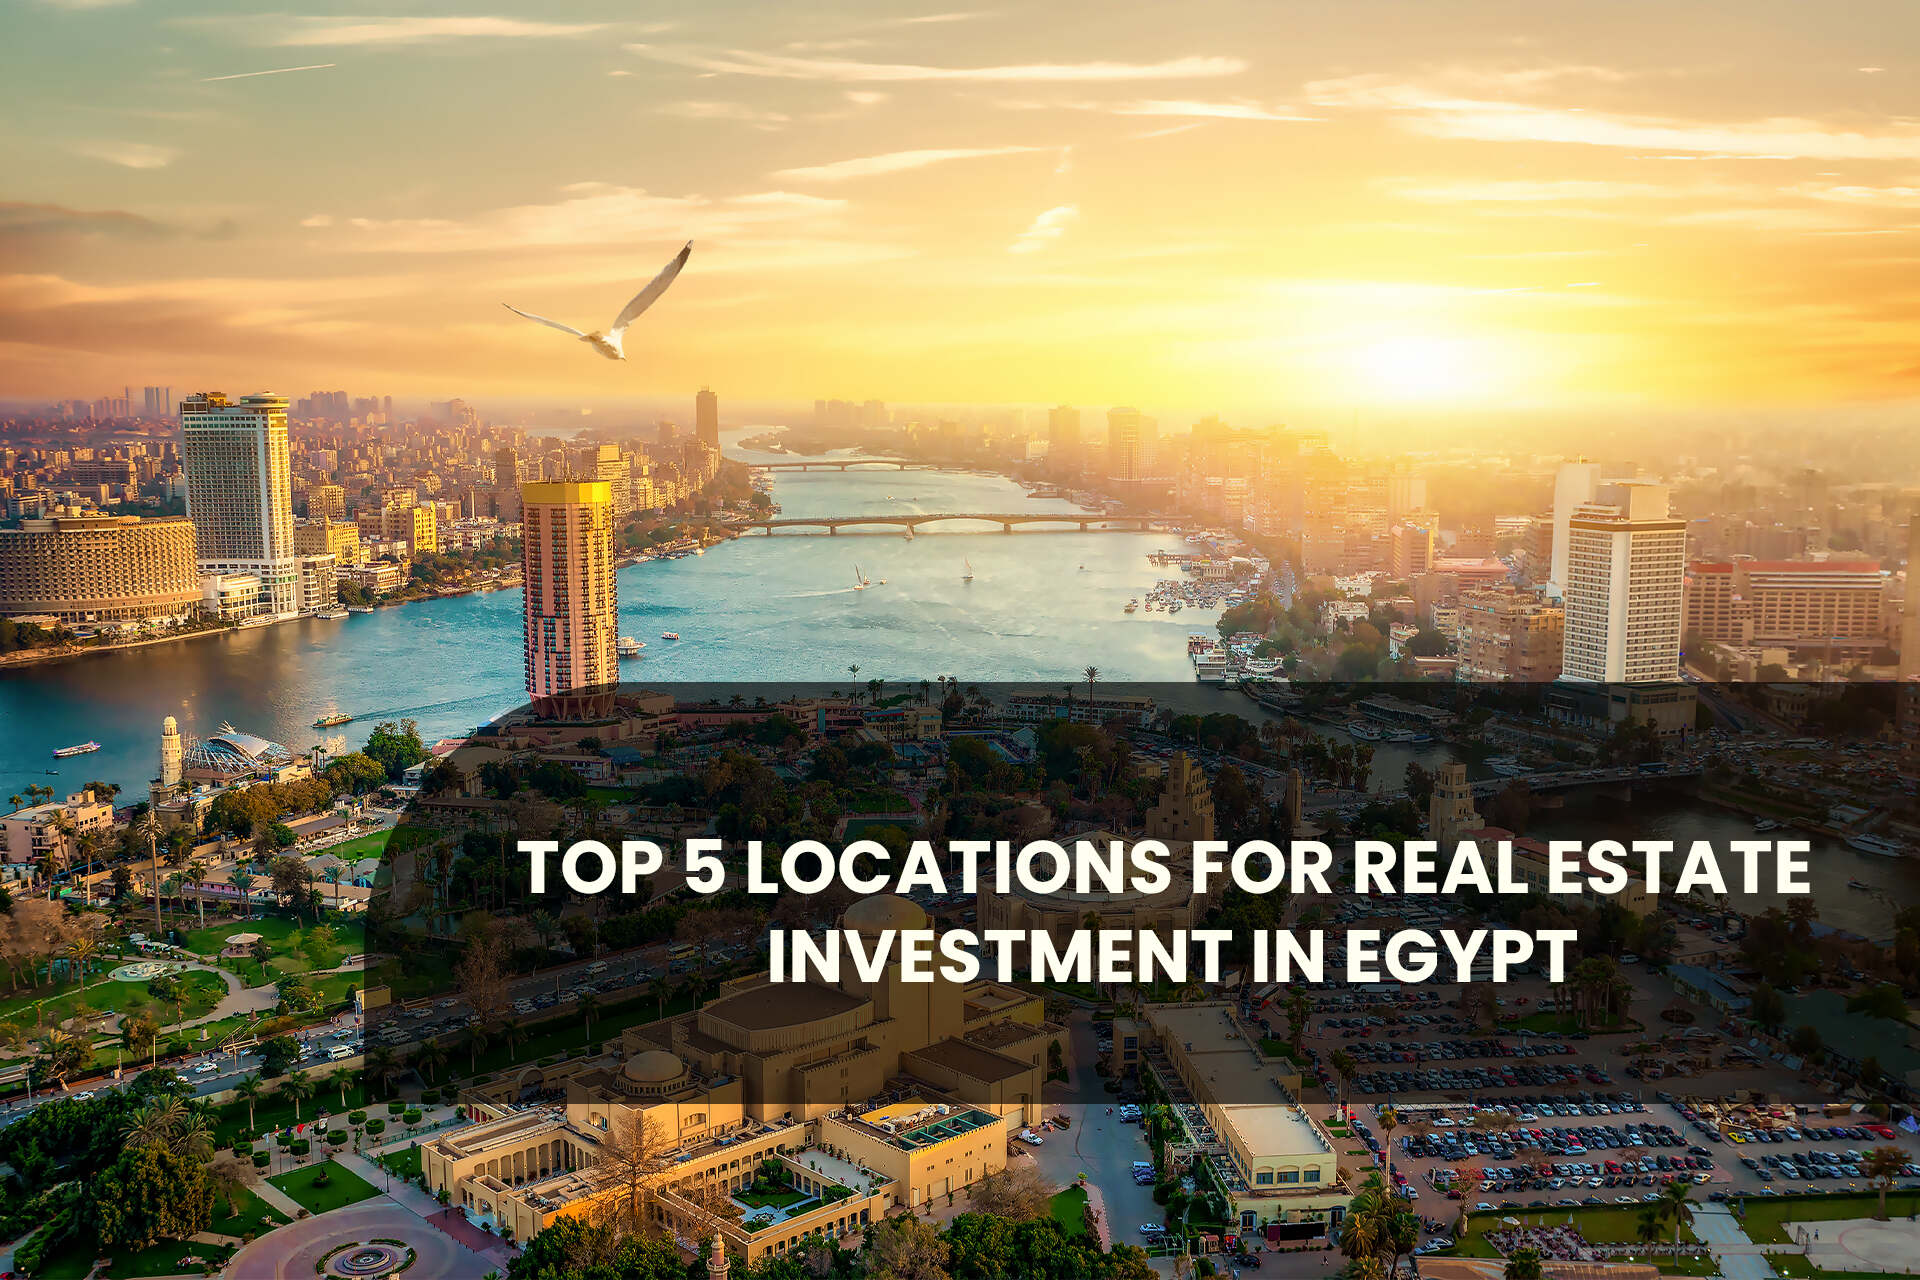 Top 5 Locations for Real Estate Investment